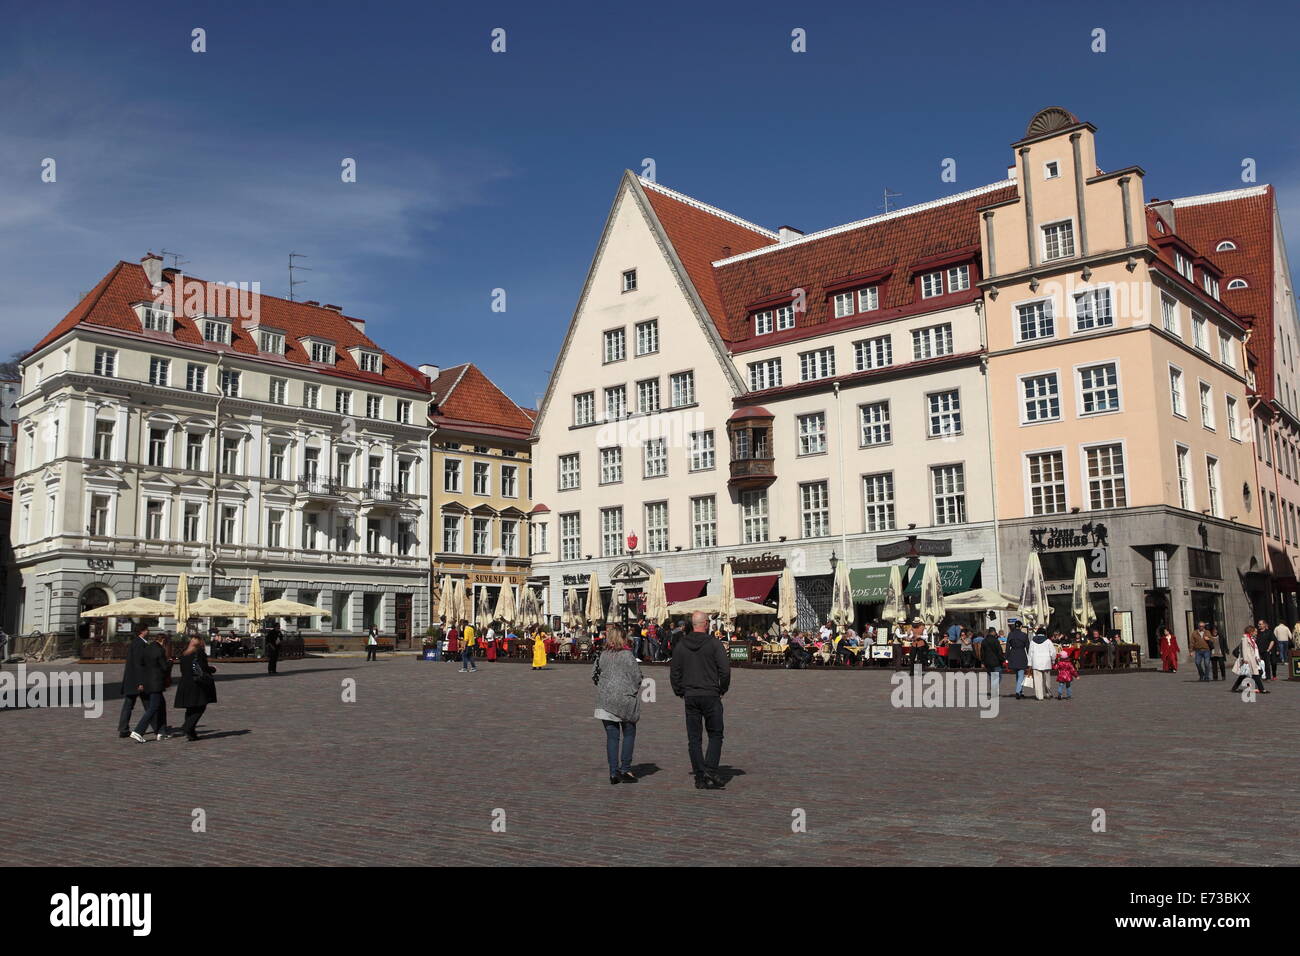 Town Hall Square, surrounded by grand, historic buildings, many now used as bars and cafes, in Tallinn, Estonia, Europe Stock Photo